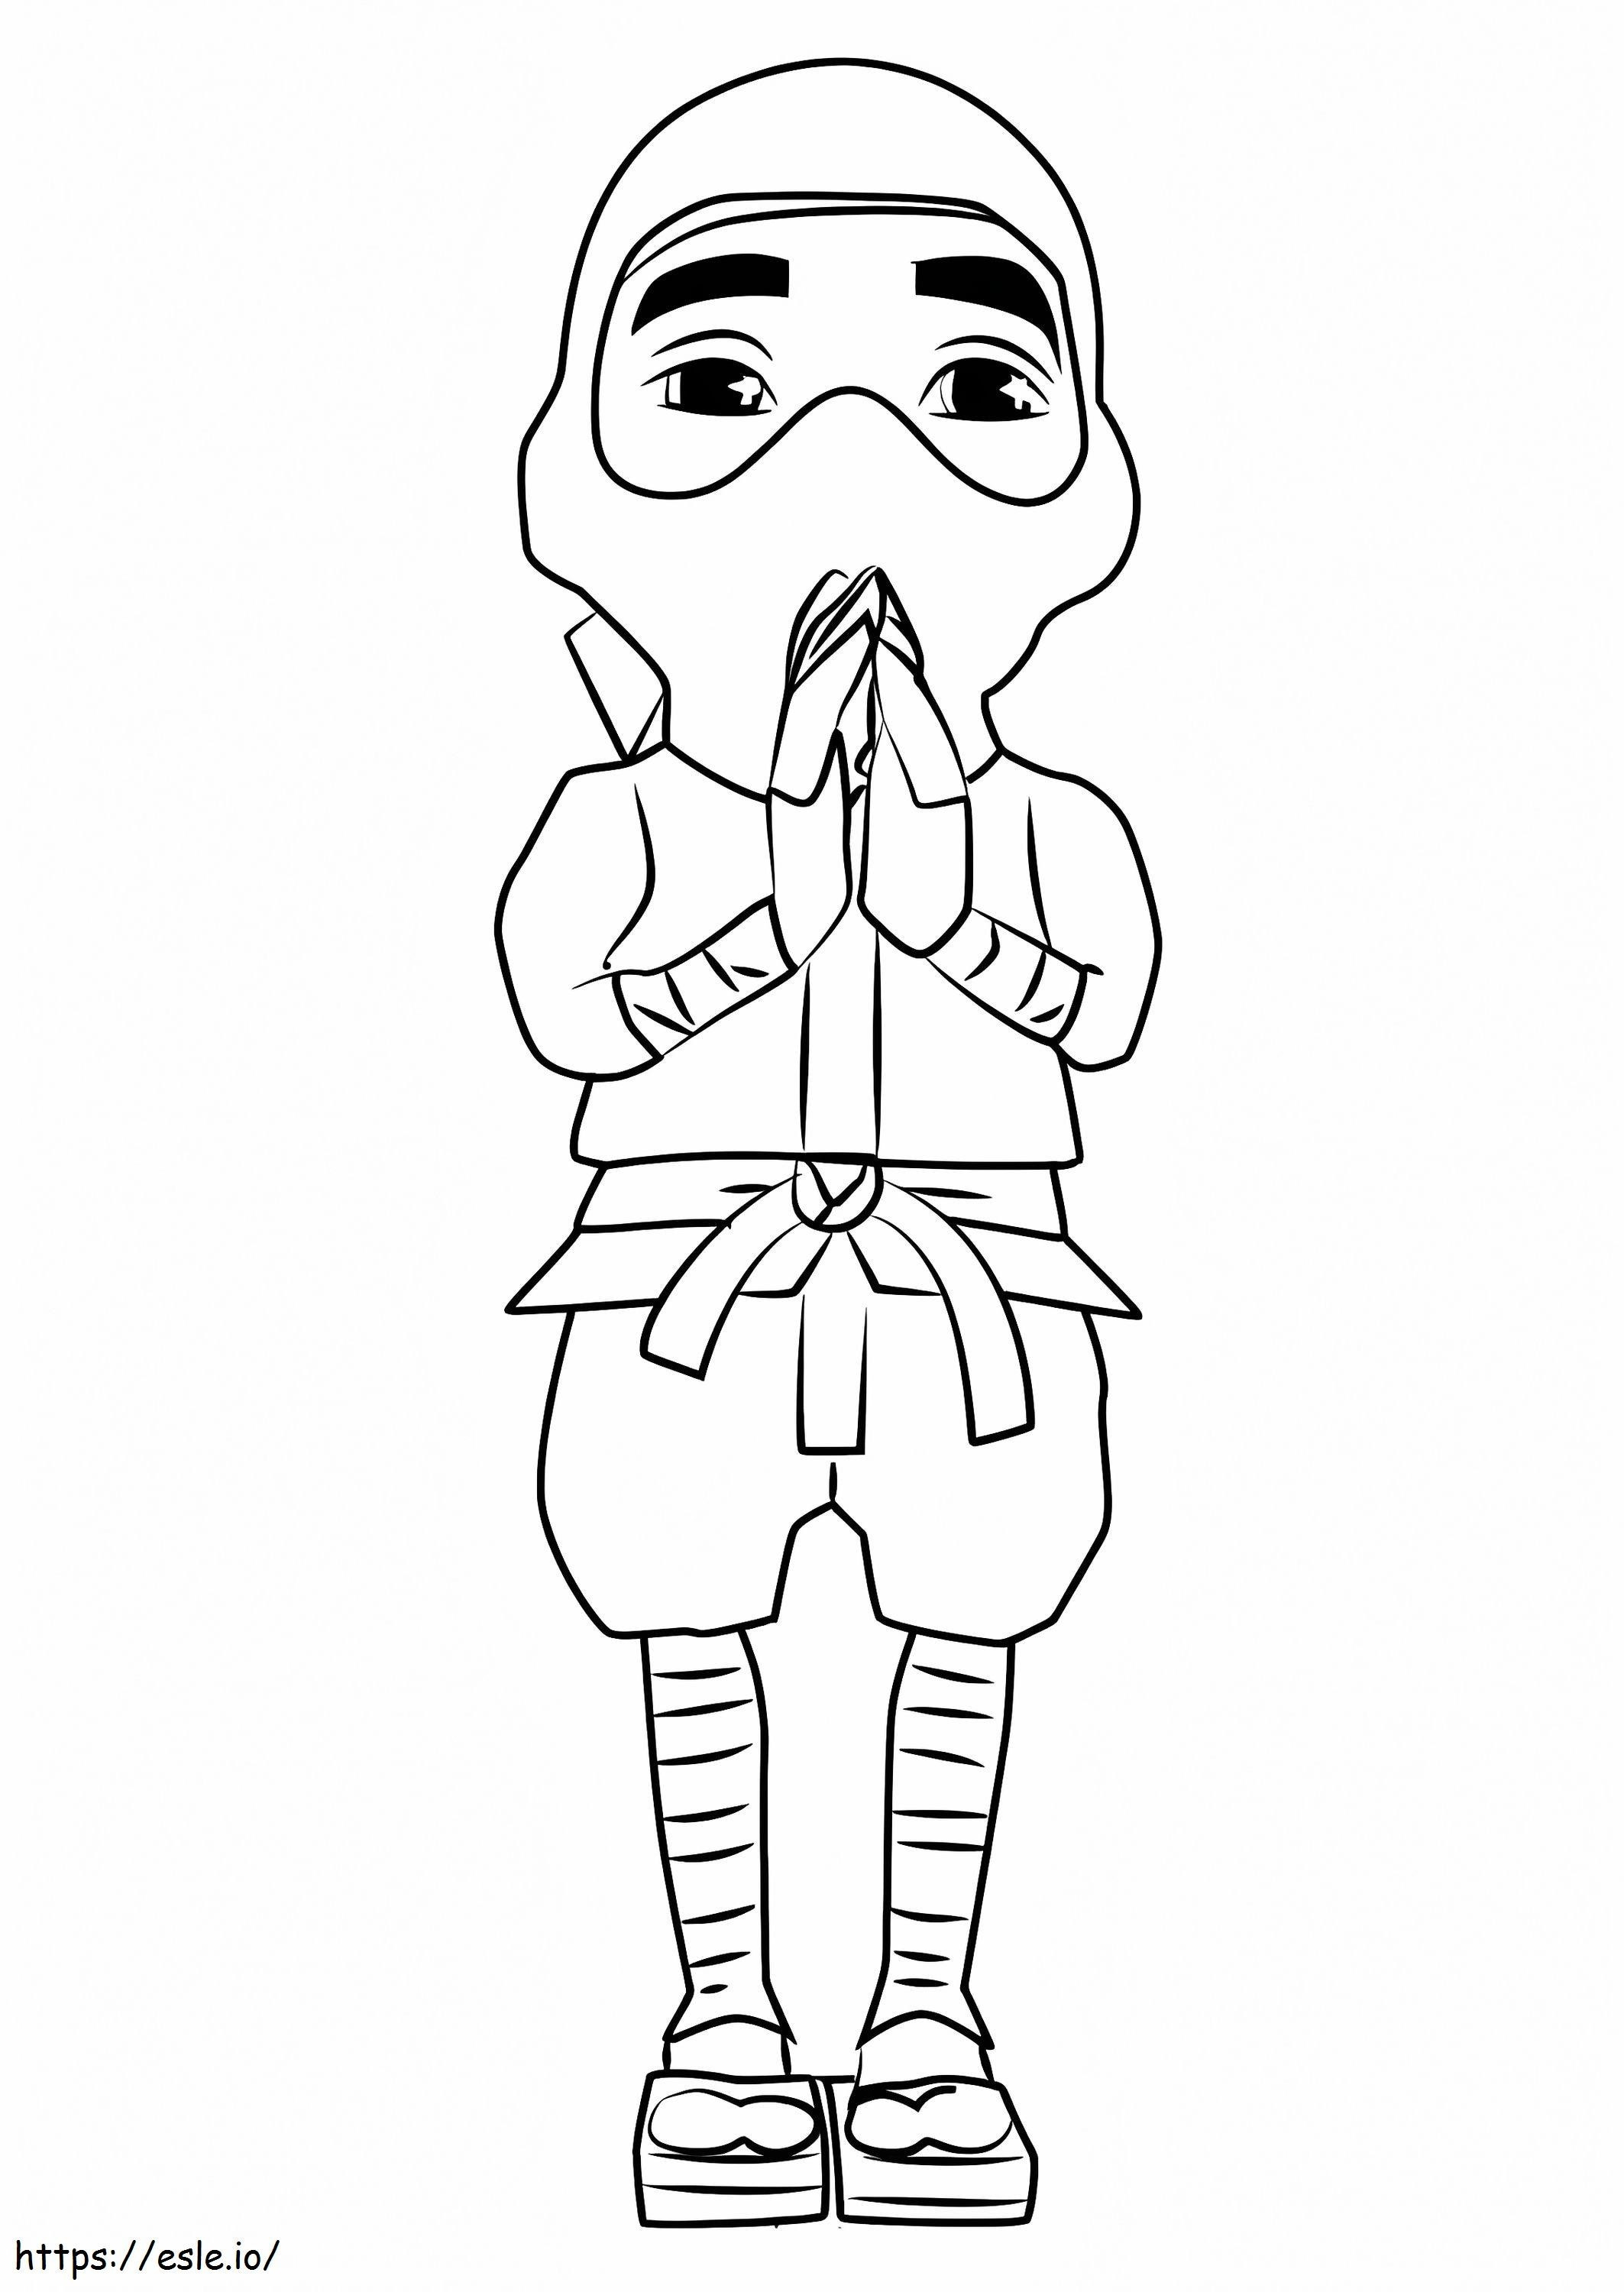 Ninja From Subway Surfers coloring page